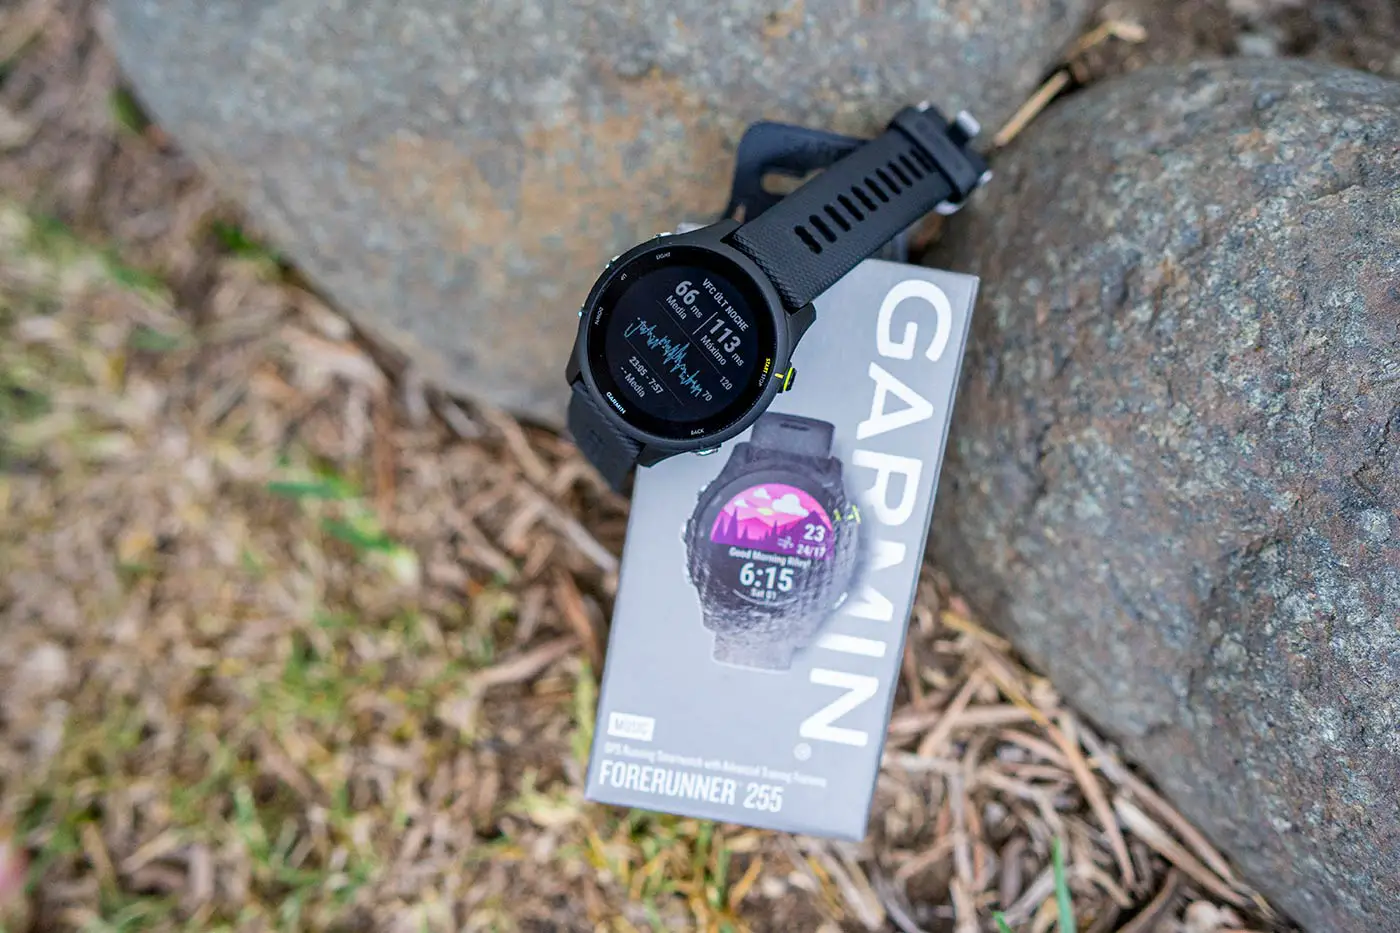 Garmin Forerunner 255 | Full review, details and opinion - Correr